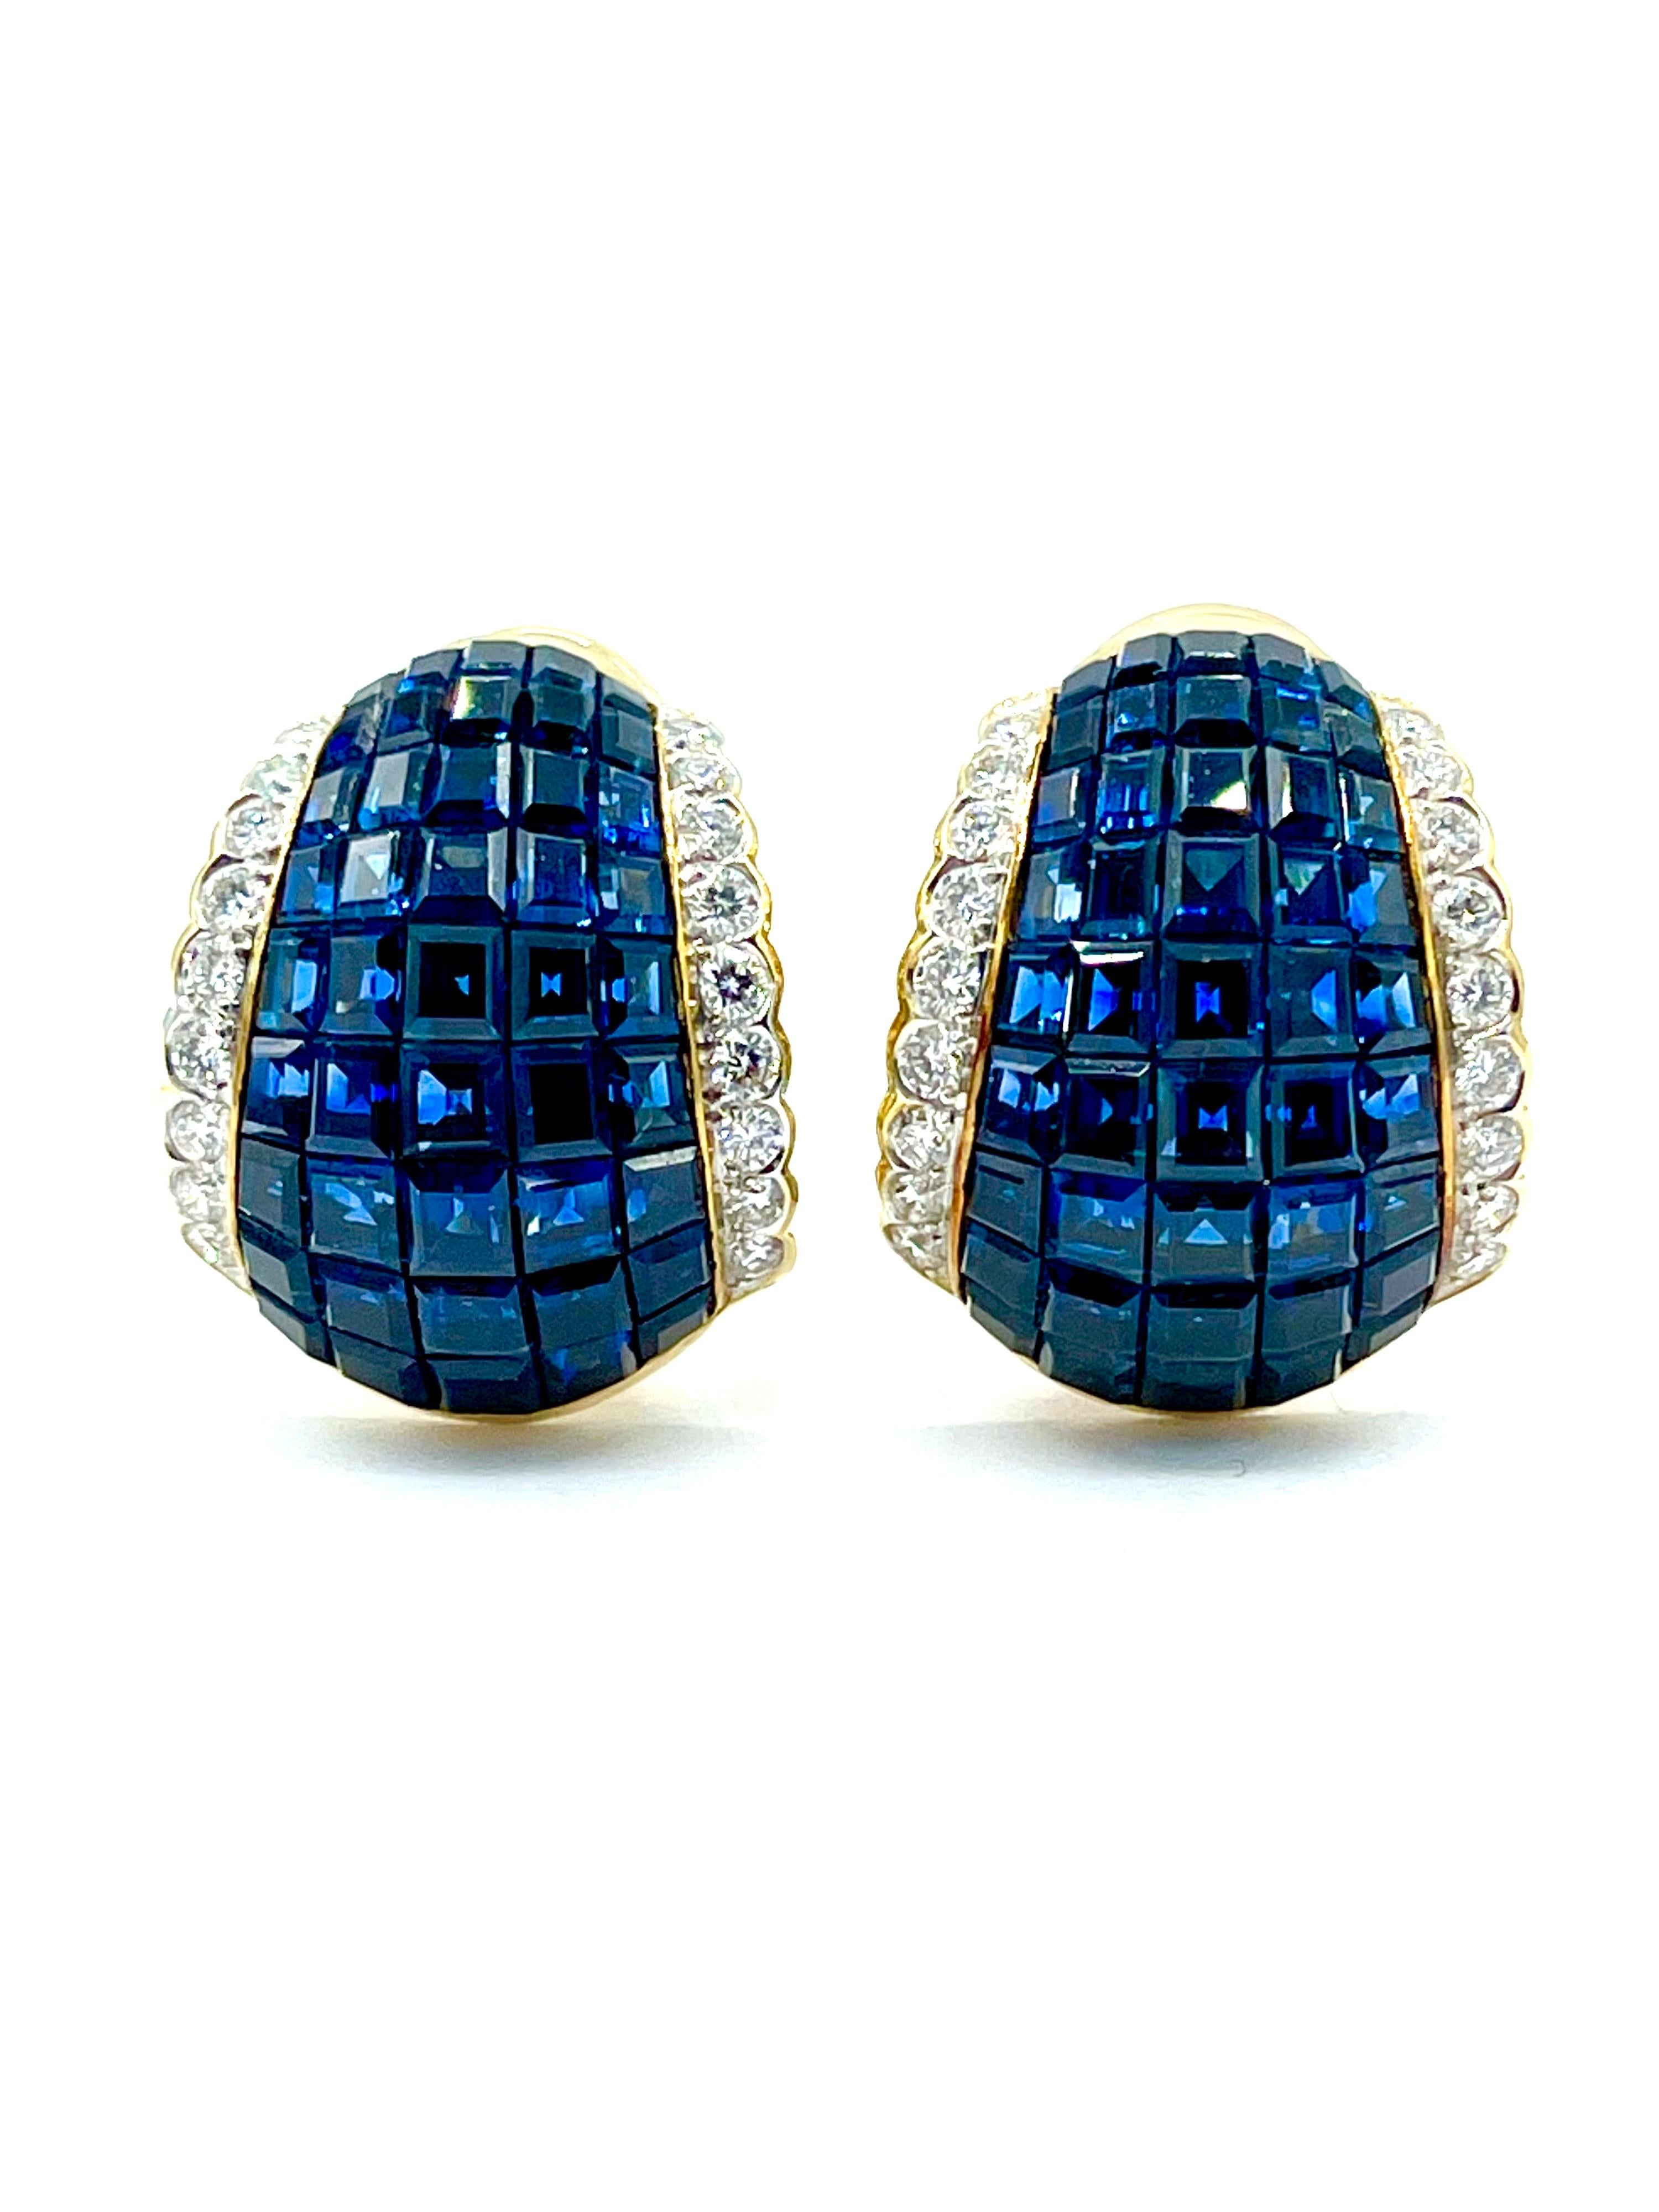 A beautifully made pair of invisible set Sapphire and Diamond earrings in 18K yellow gold.  The earrings contain five rows of square cut Sapphires set between two rows of round brilliant cut Diamonds.  The 90 Sapphires have a total weight of 8.00